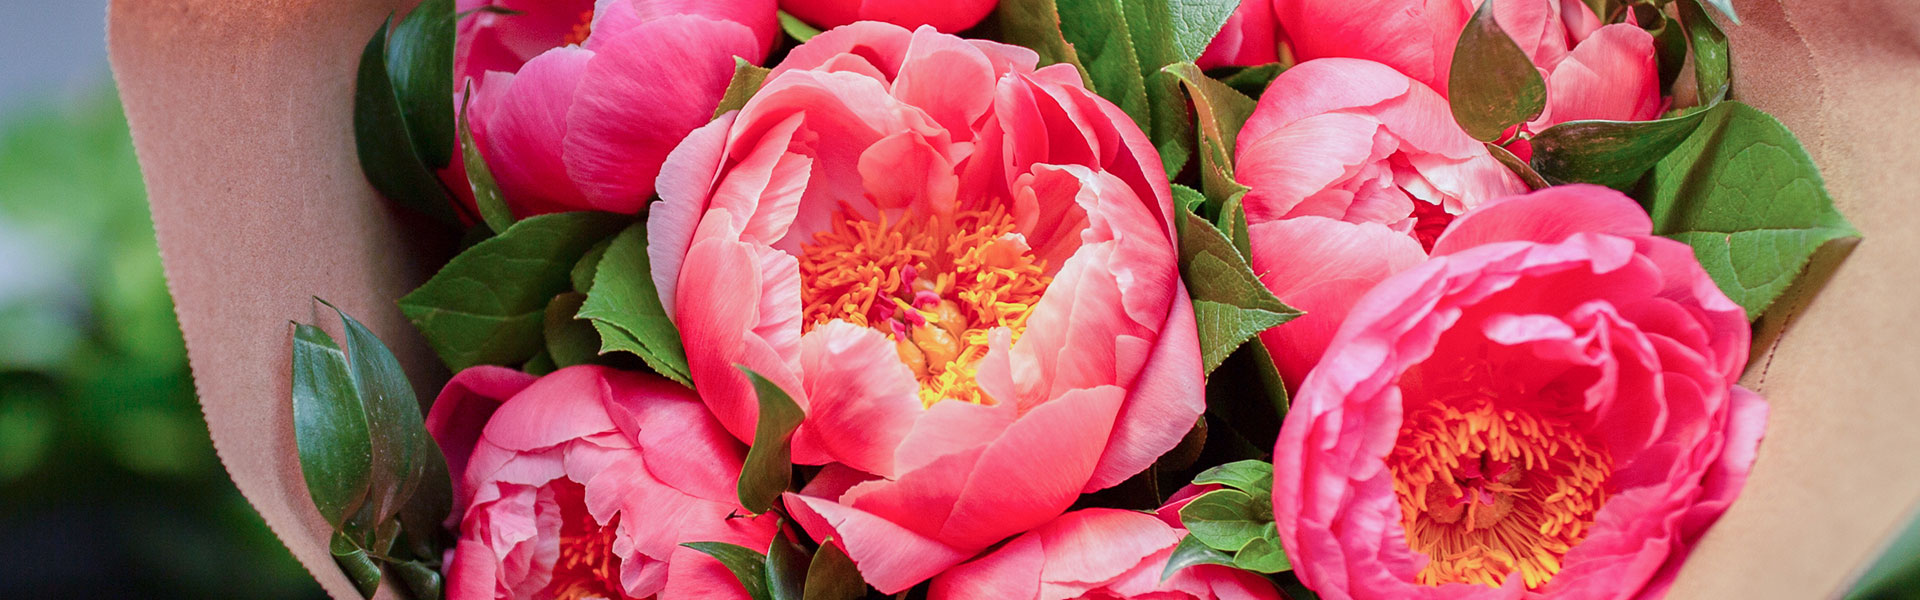 The Perfect Flower for Mother's Day: Peonies Please!